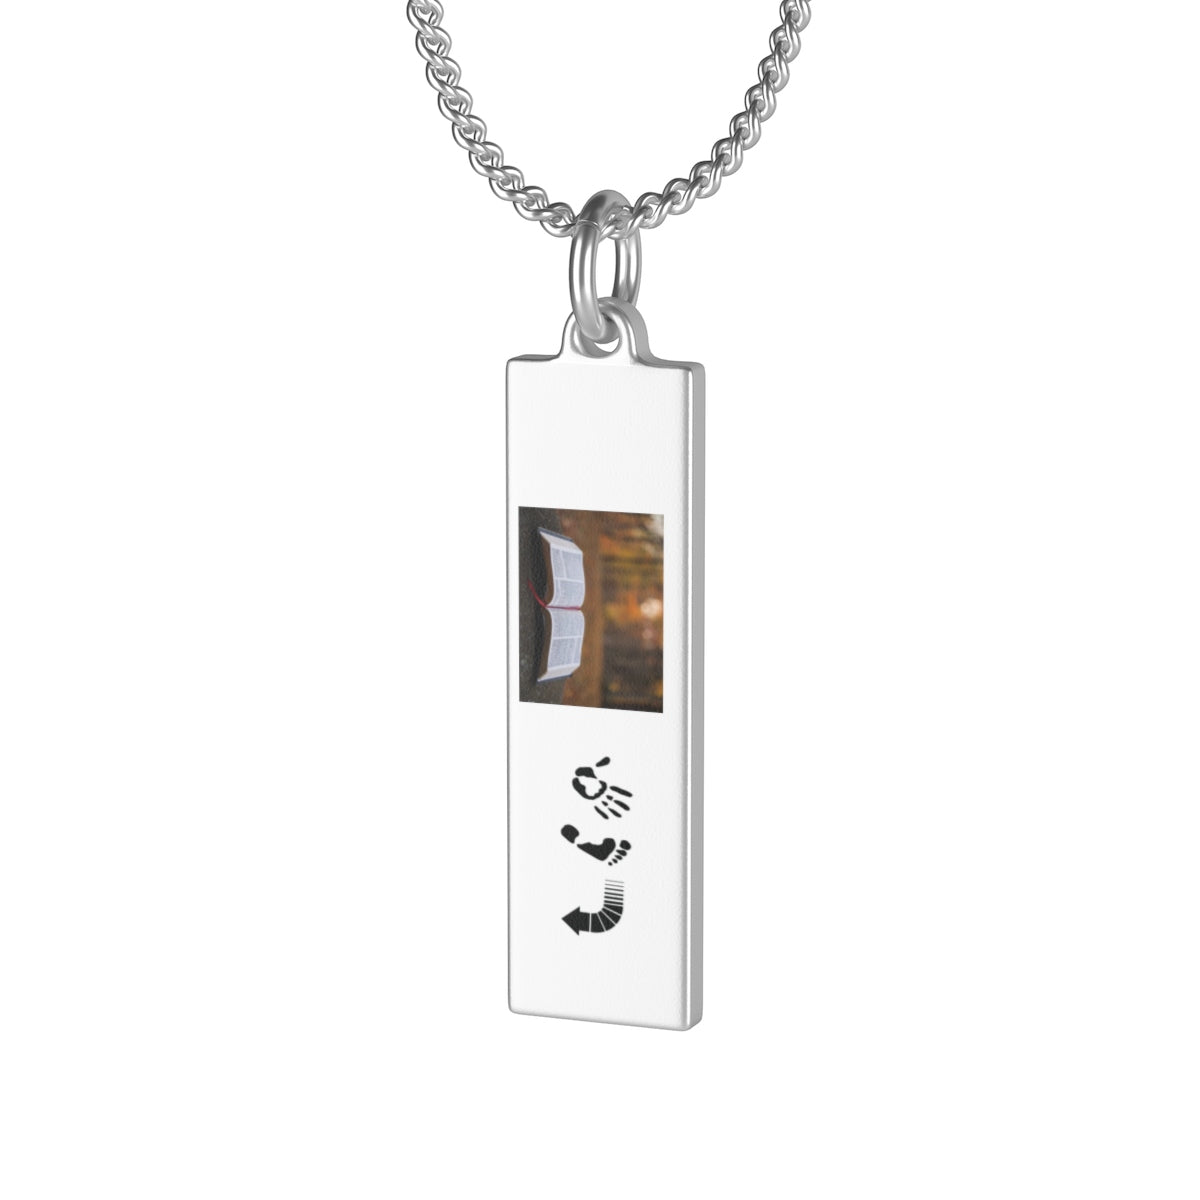 Five Toes Down LGx2 Single Loop Necklace